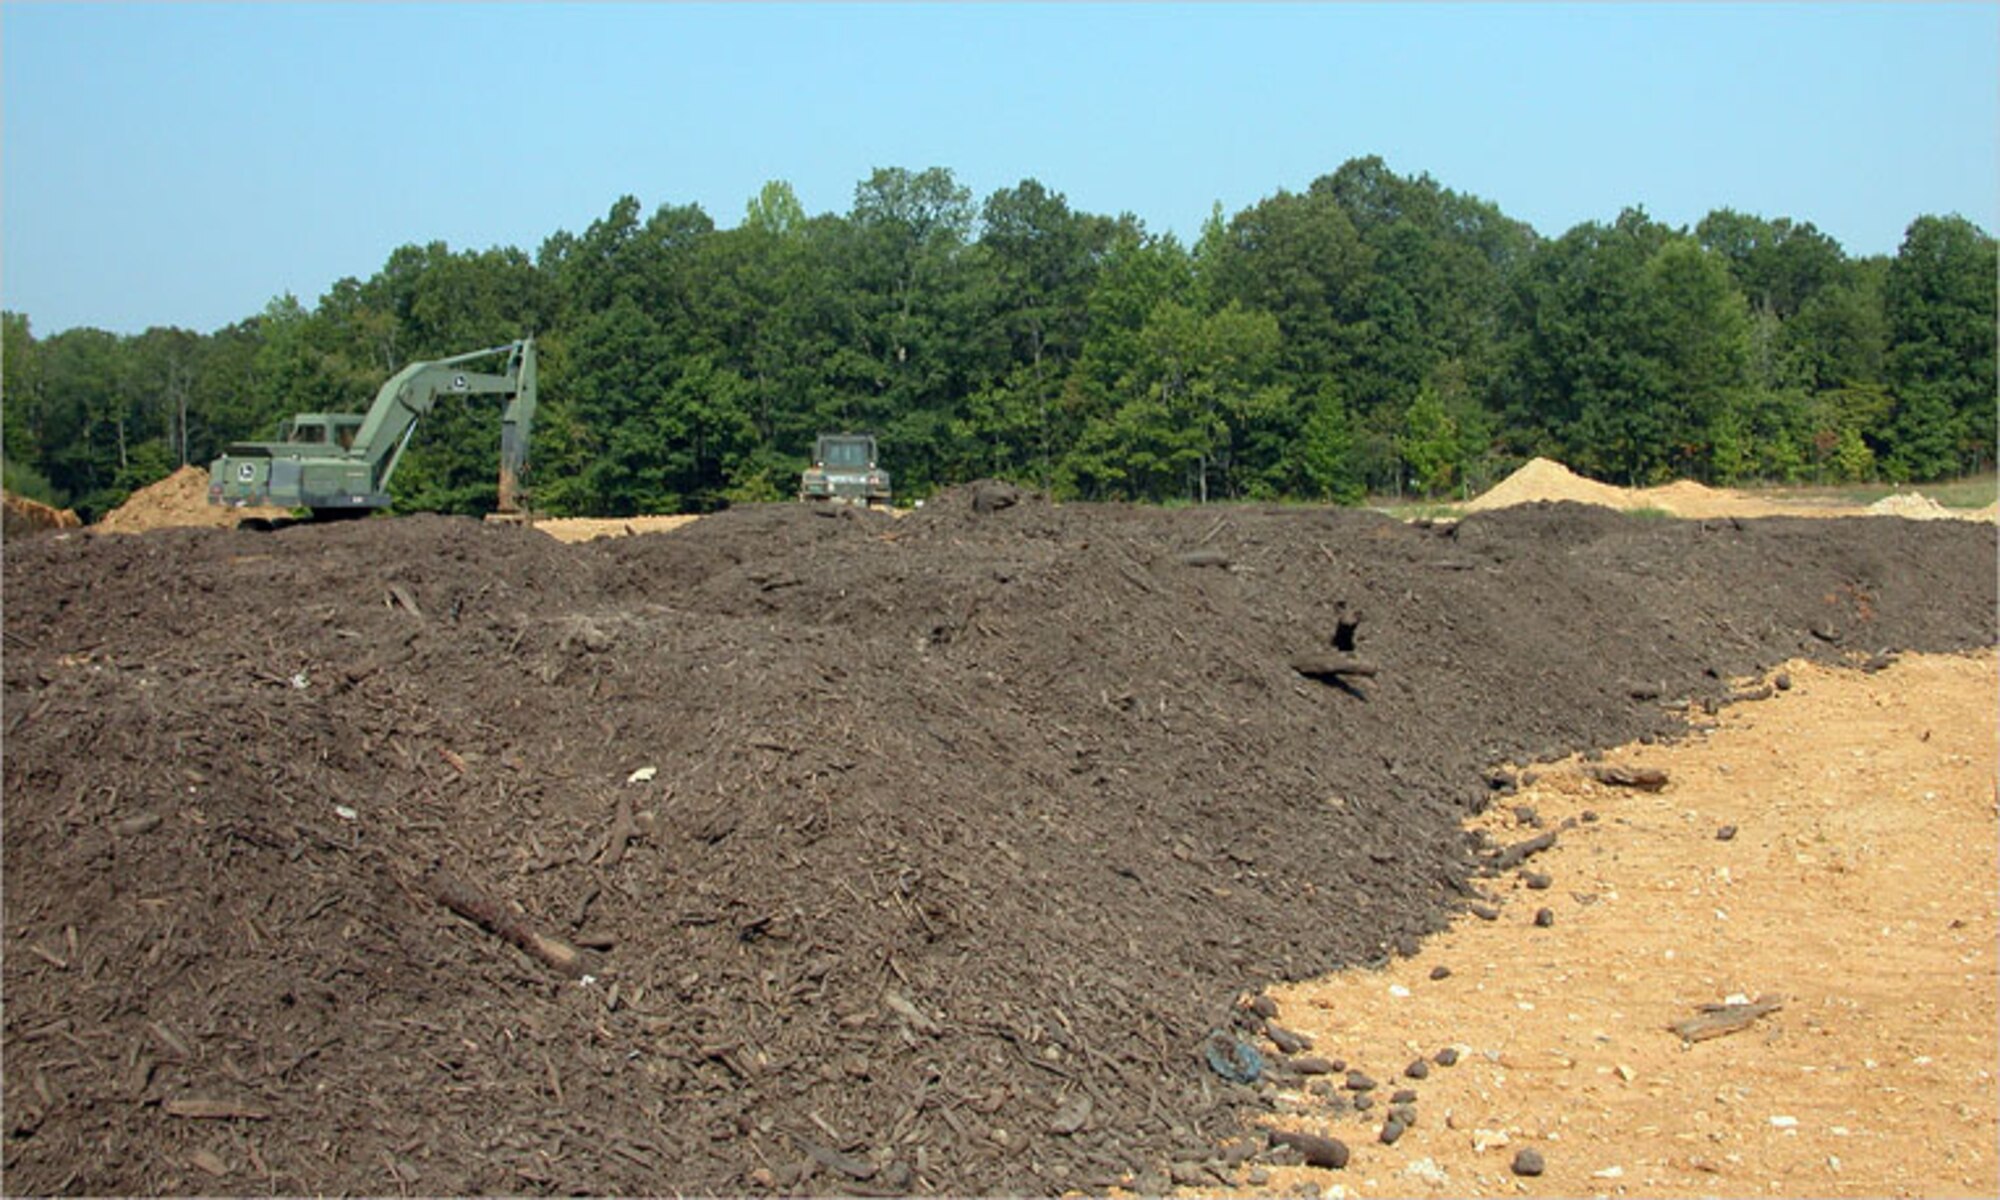 Mulch from the Horse Barn Road wood pile is now stockpiled at the landfill to prevent stormwater runoff. (Photo by Mike Hodges)